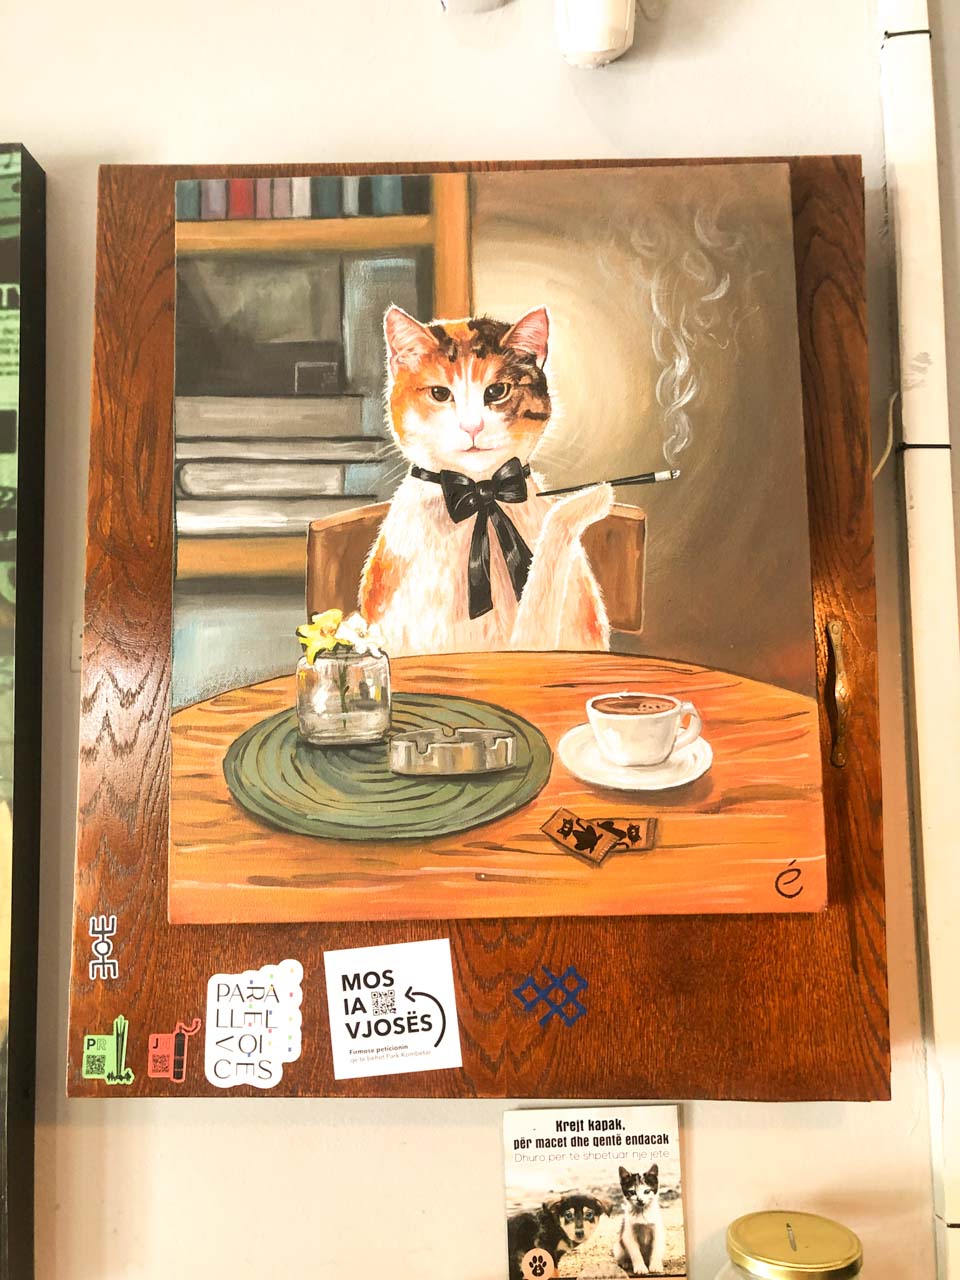 Painting of a cat holding a long cigarette holder on the wall of Dit’ e Nat’ in Pristina, Kosovo